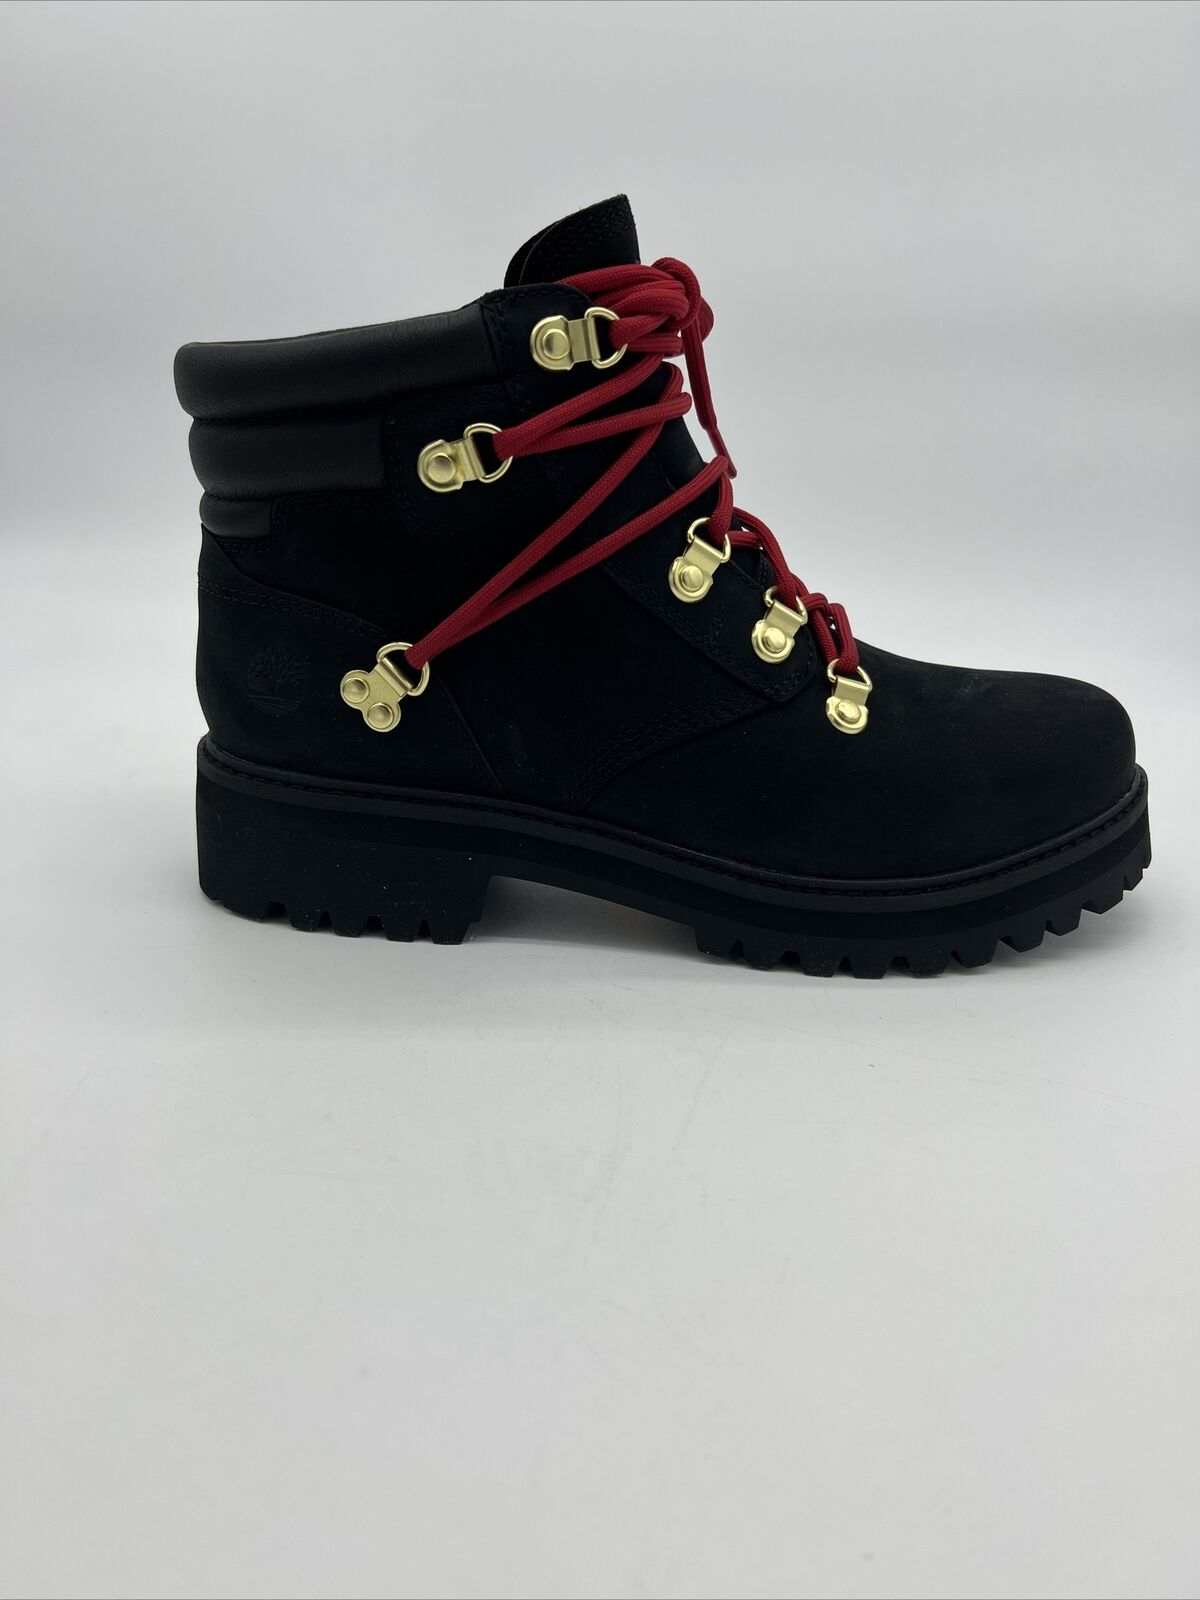 Timberland Limited Heritage 6 in Boot Black Nubuck Women’s Size 8.5 NEW